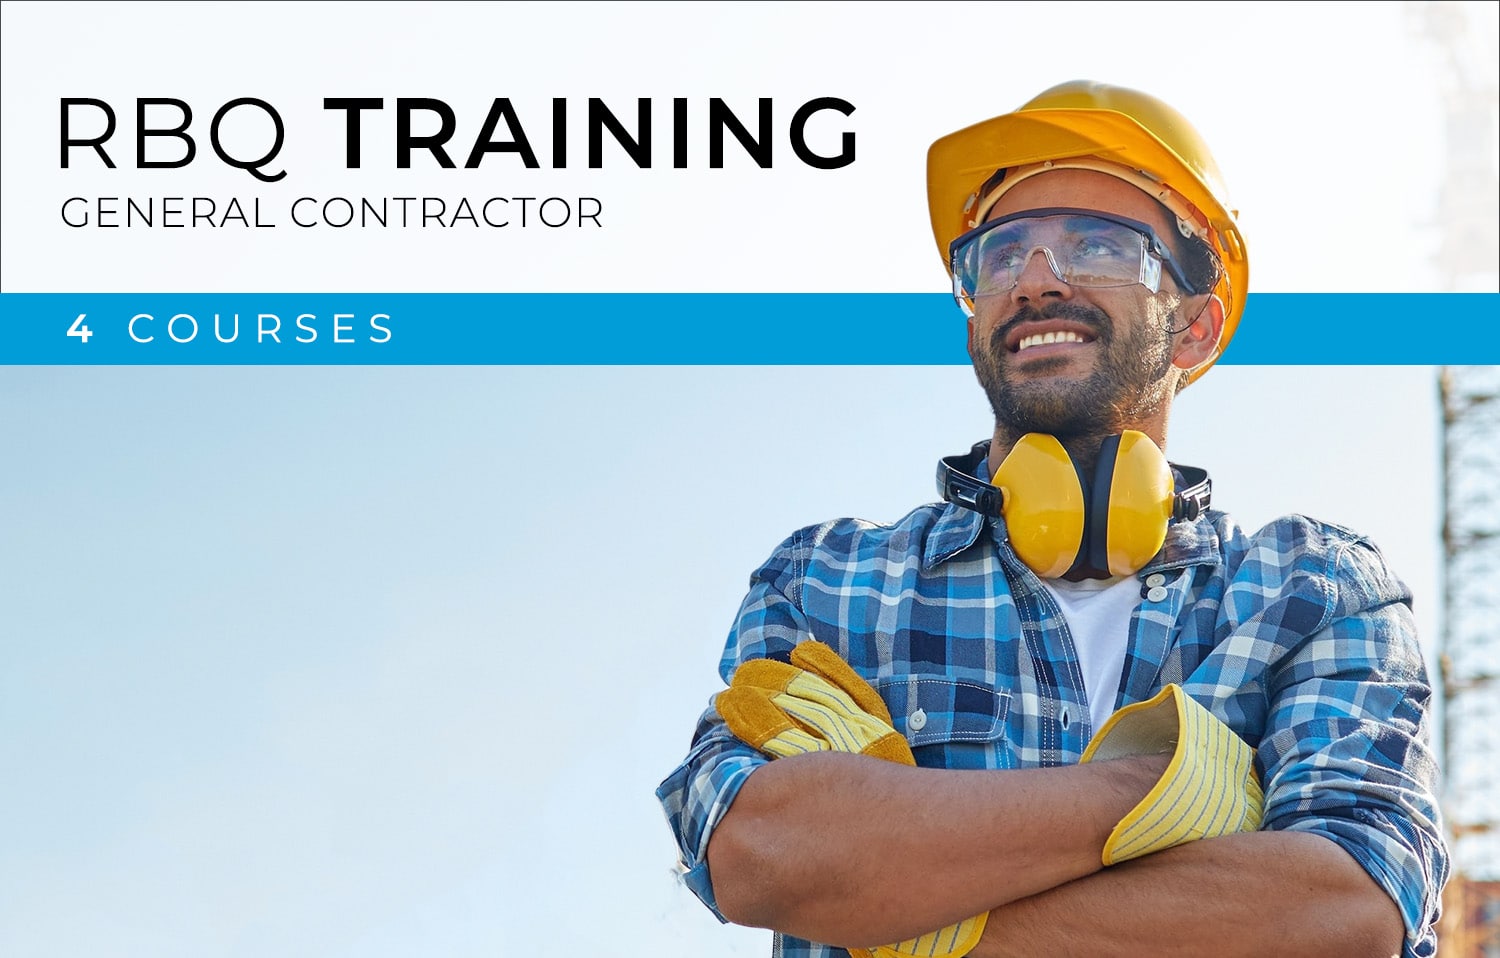 Online RBQ training for obtaining general contractor's licence